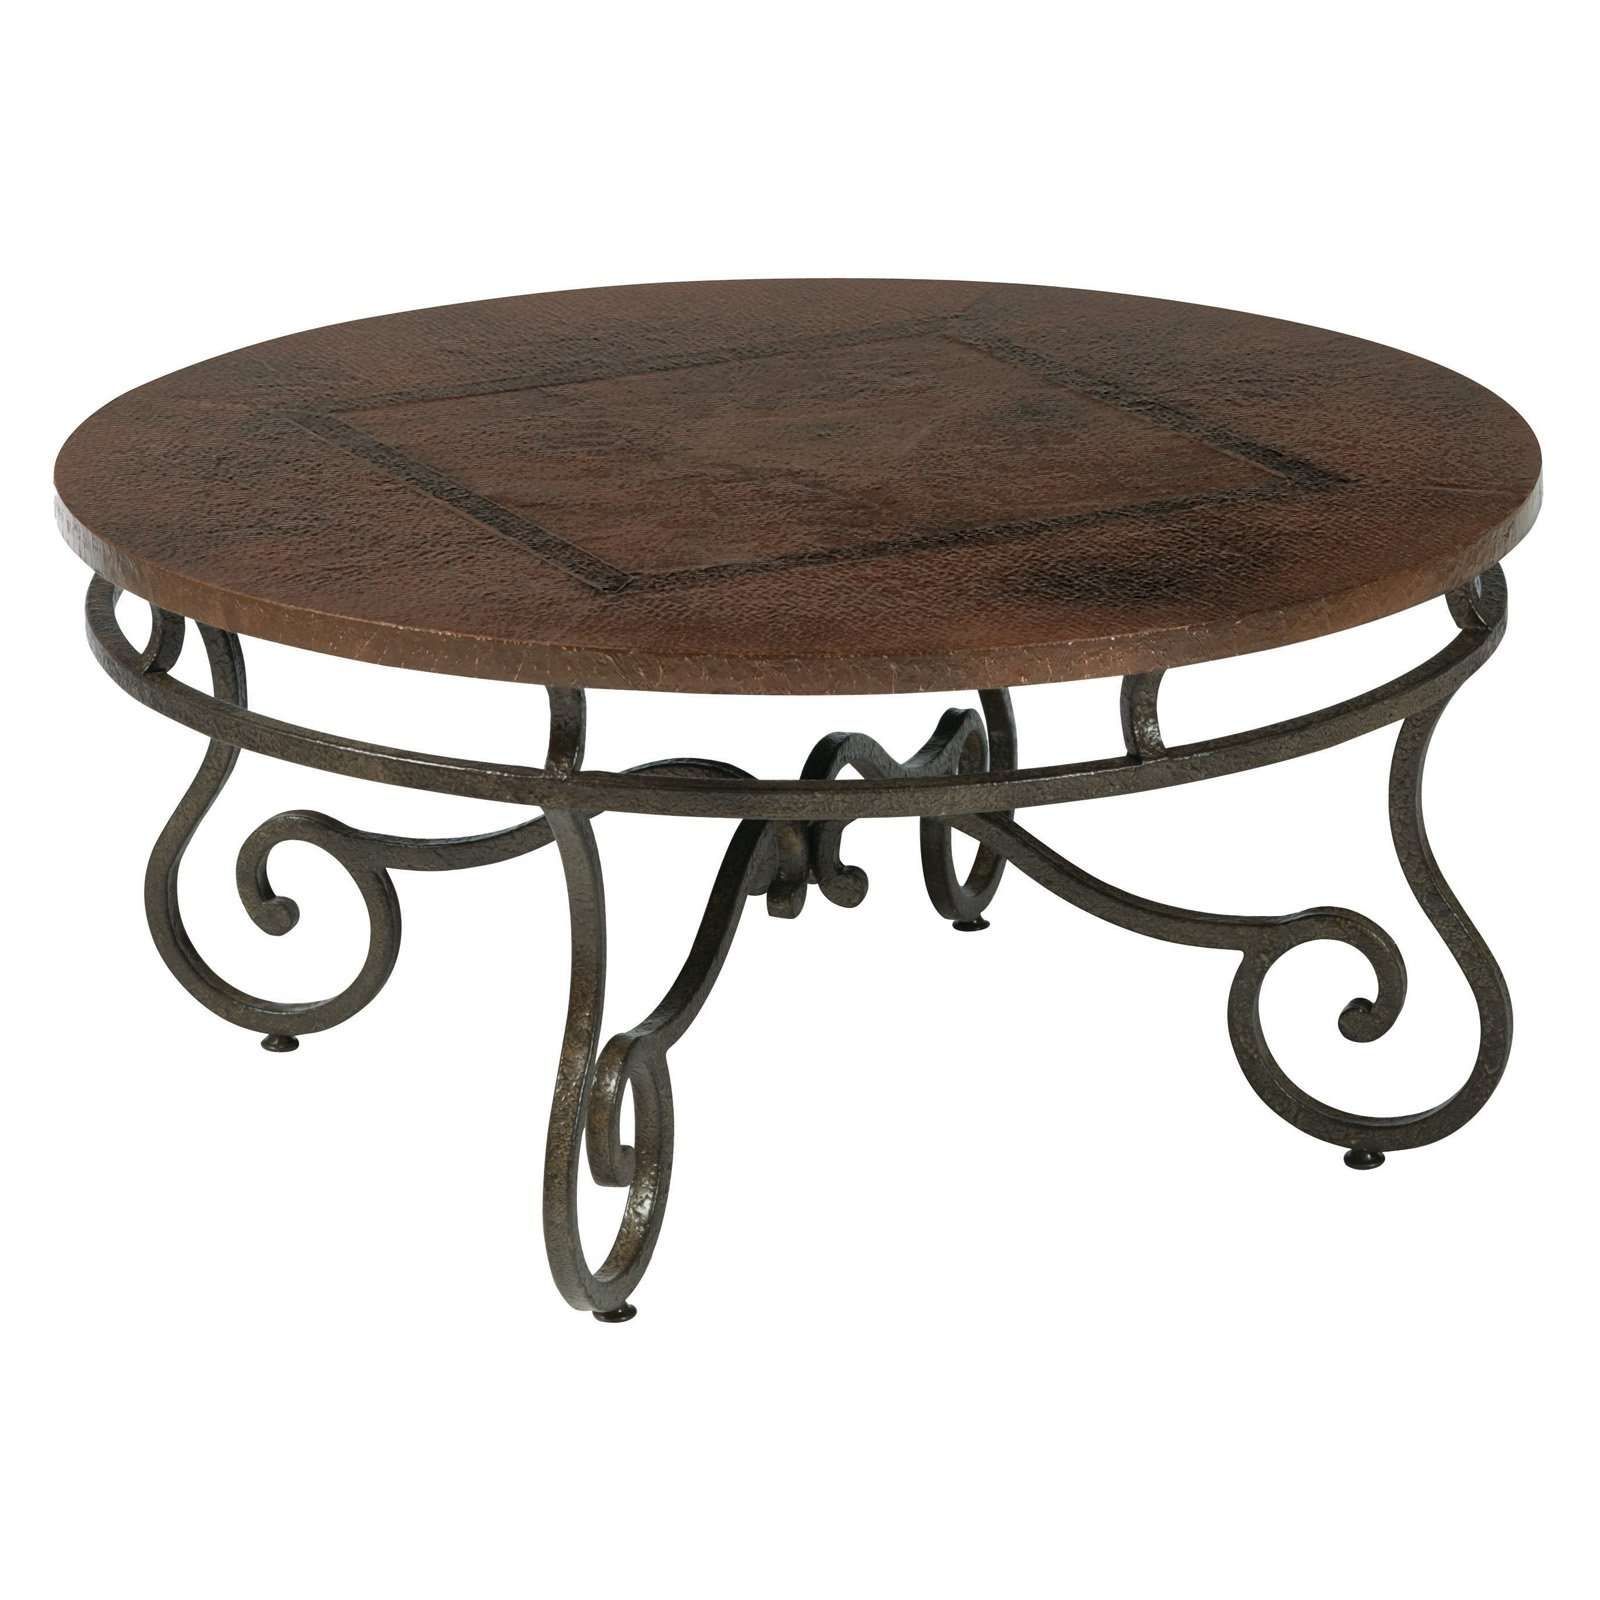 Old And Vintage Round Coffee Table With Wood Top Made From Pertaining To Favorite Reclaimed Wood And Glass Coffee Tables (View 5 of 20)